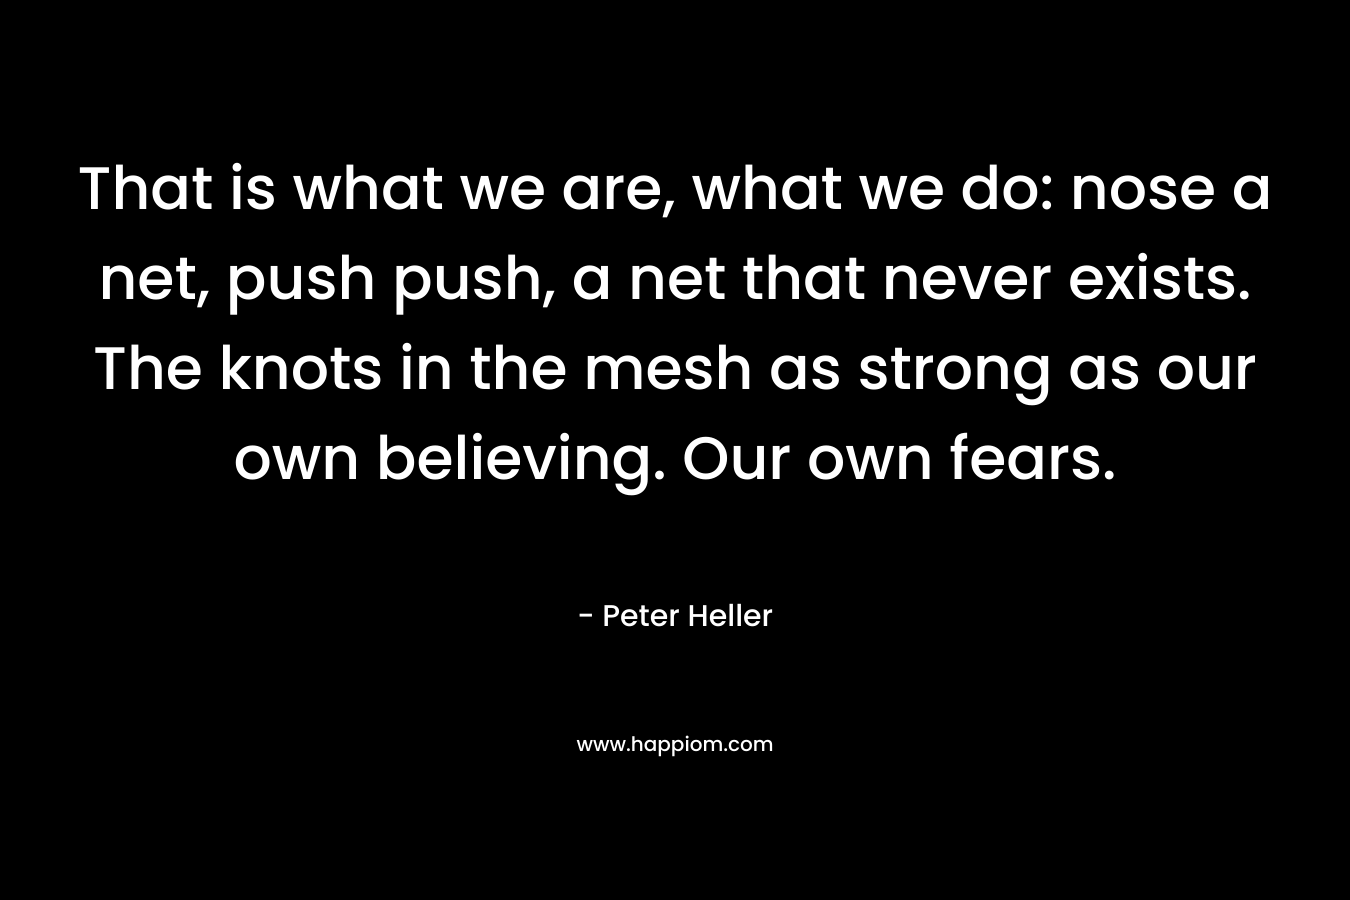 That is what we are, what we do: nose a net, push push, a net that never exists. The knots in the mesh as strong as our own believing. Our own fears. – Peter Heller